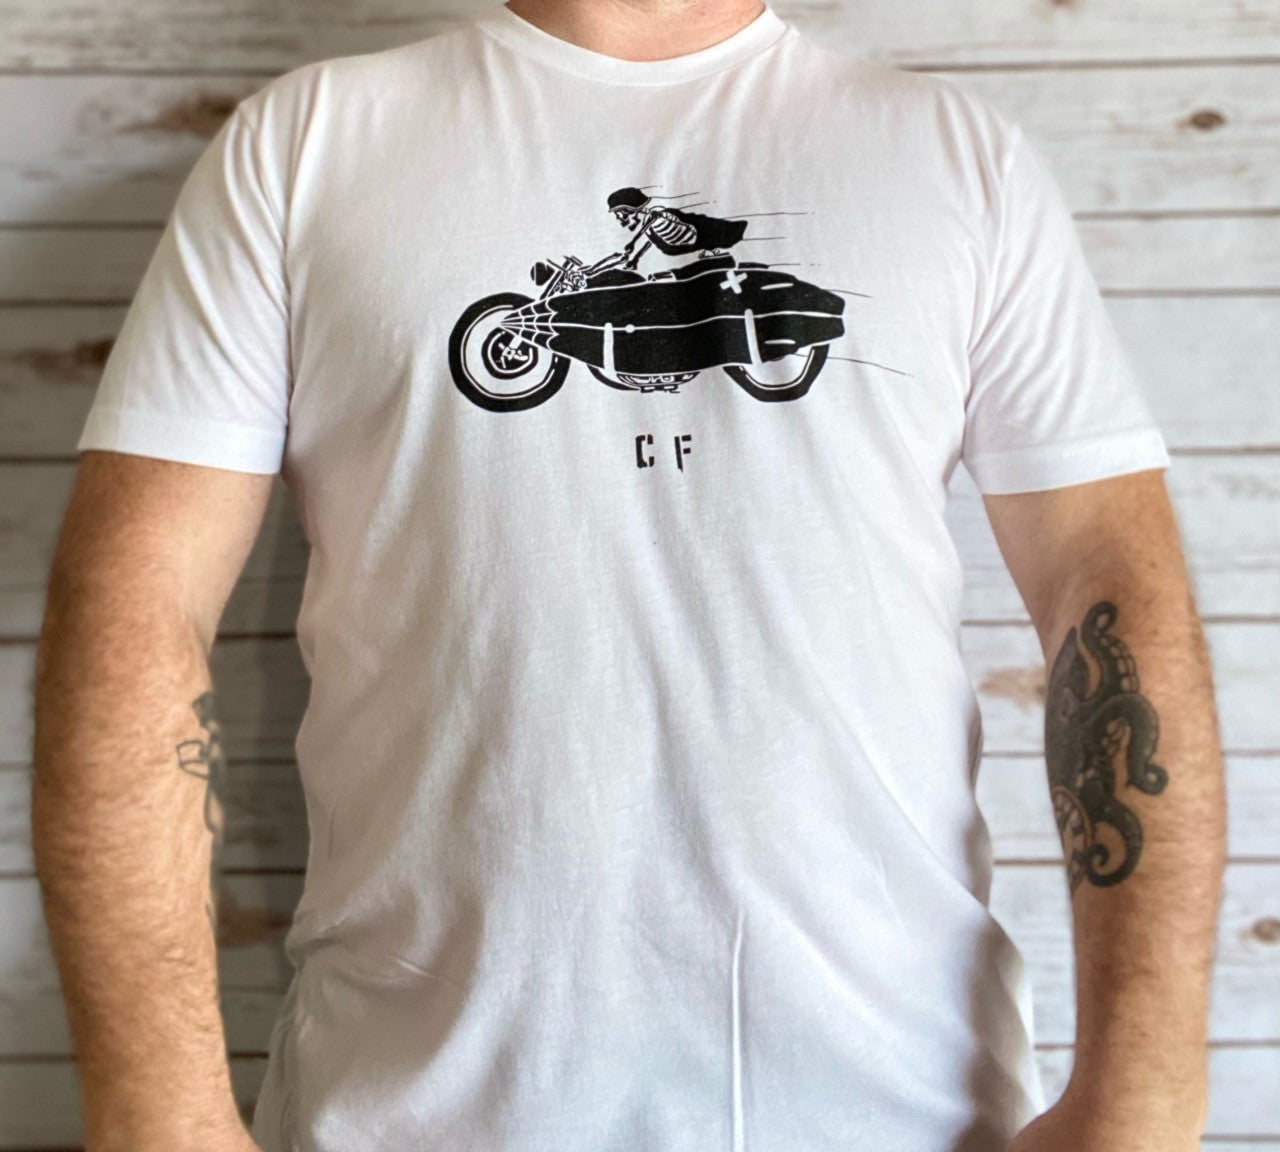 Charger surf/moto tee